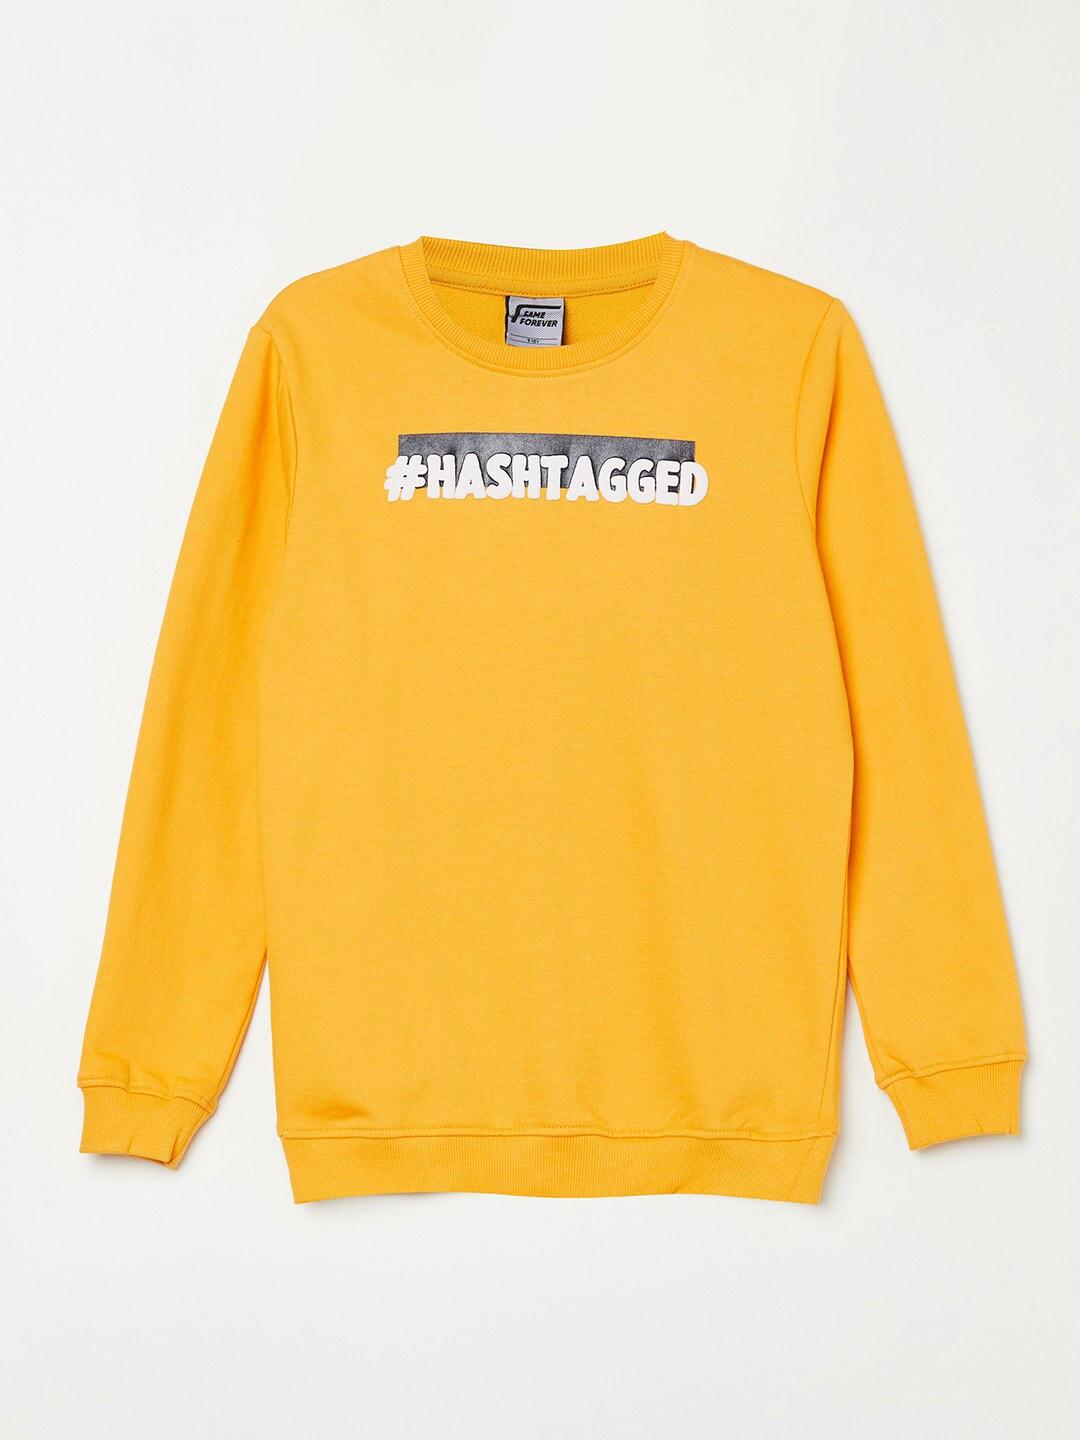 fame-forever-by-lifestyle-boys-yellow-typography-printed-pure-cotton-sweatshirt